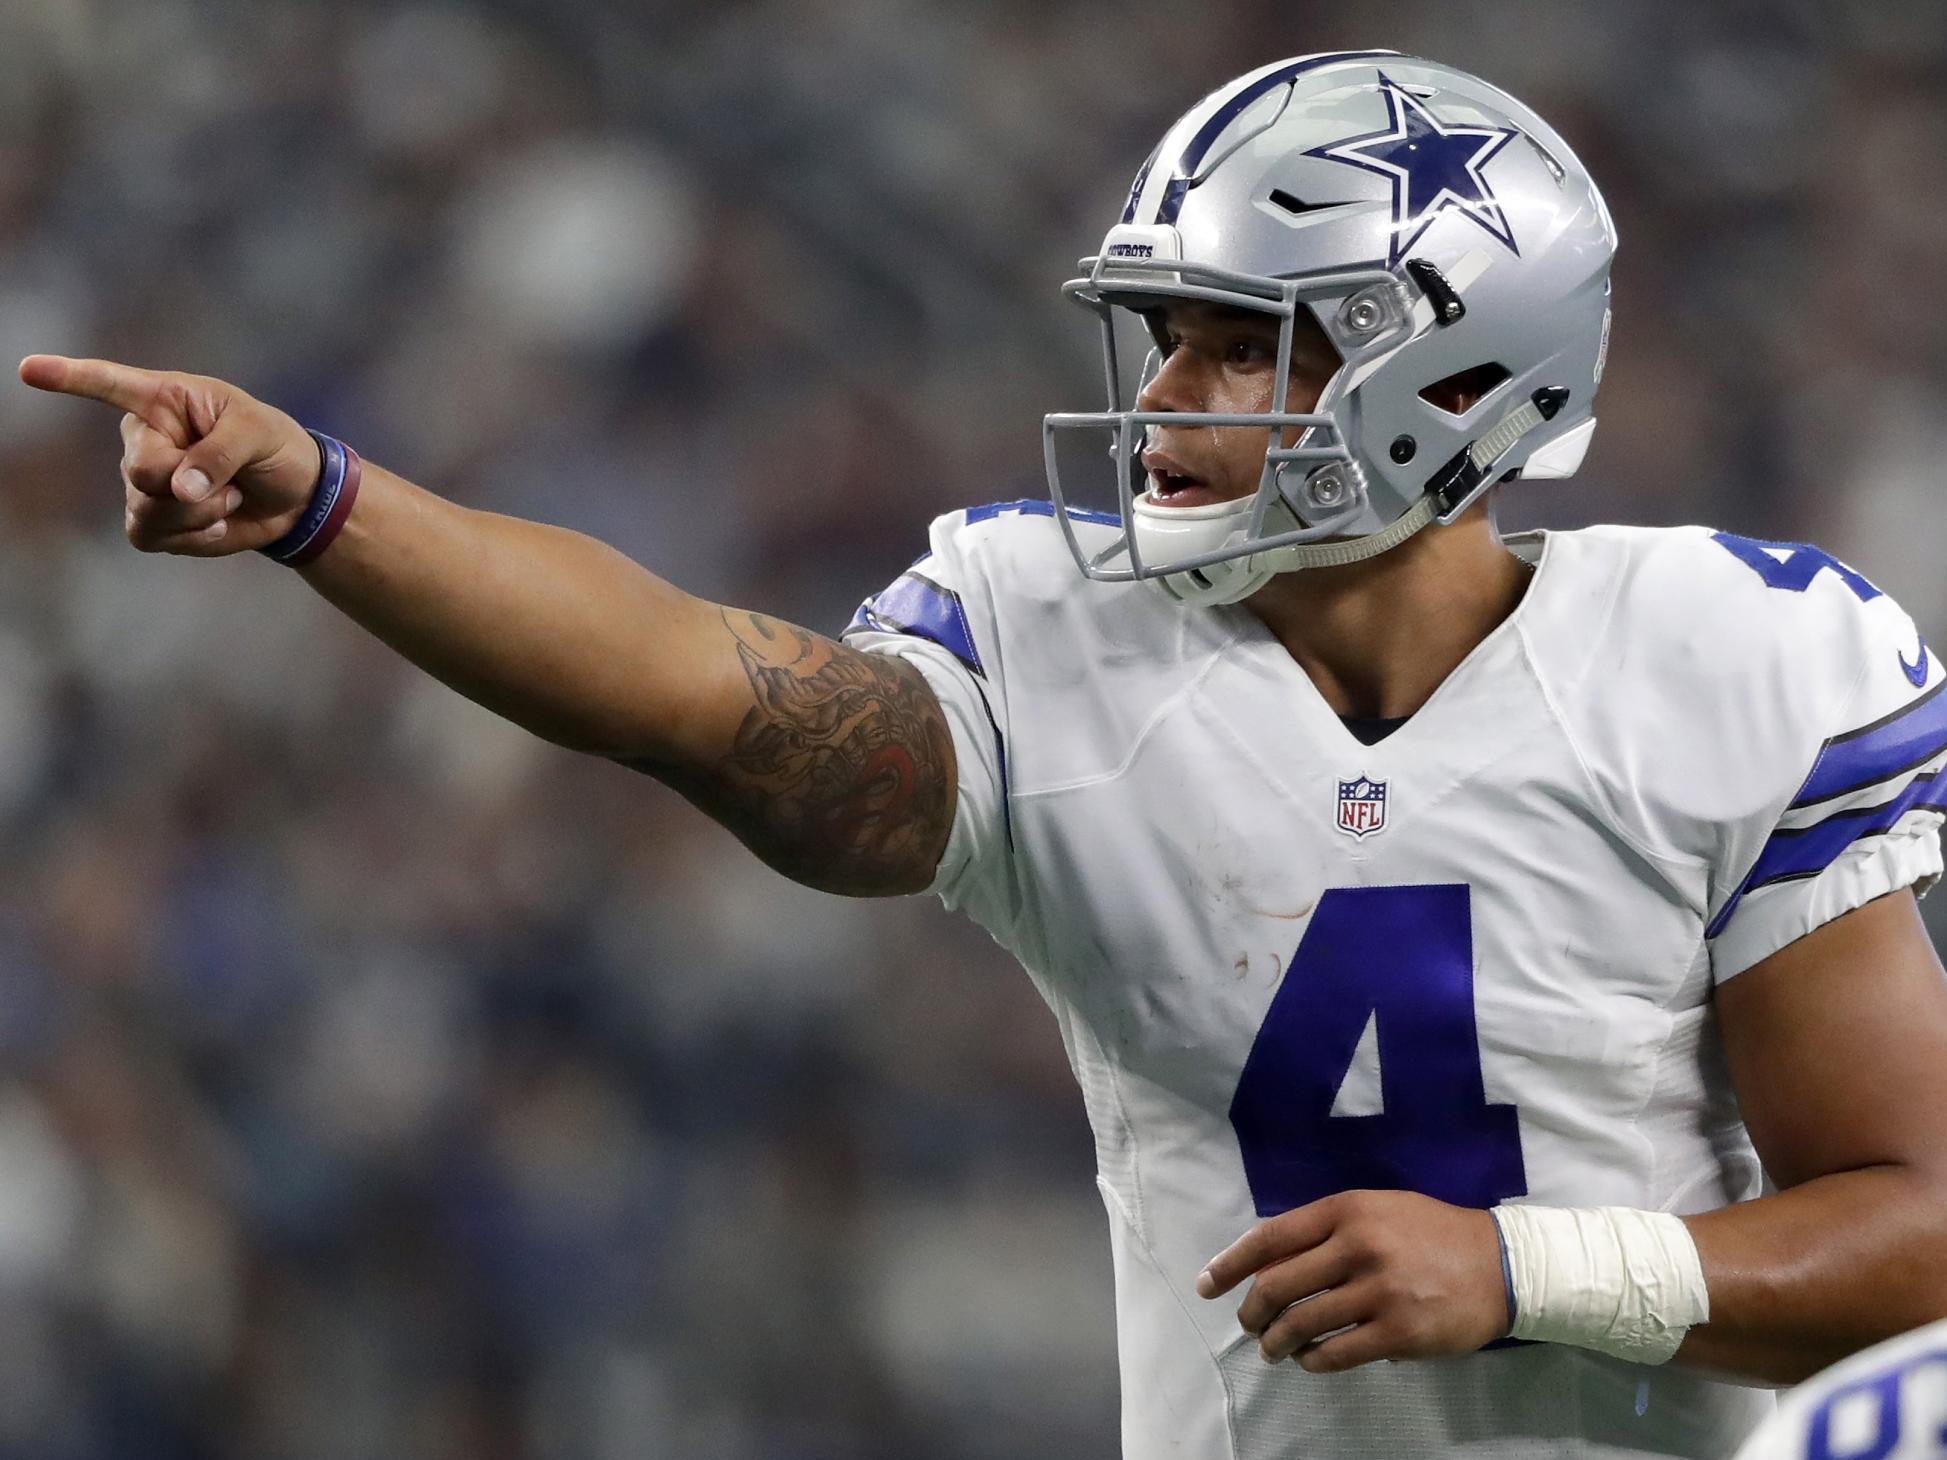 Dak Prescott shared the message with his Instagram followers on Wednesday